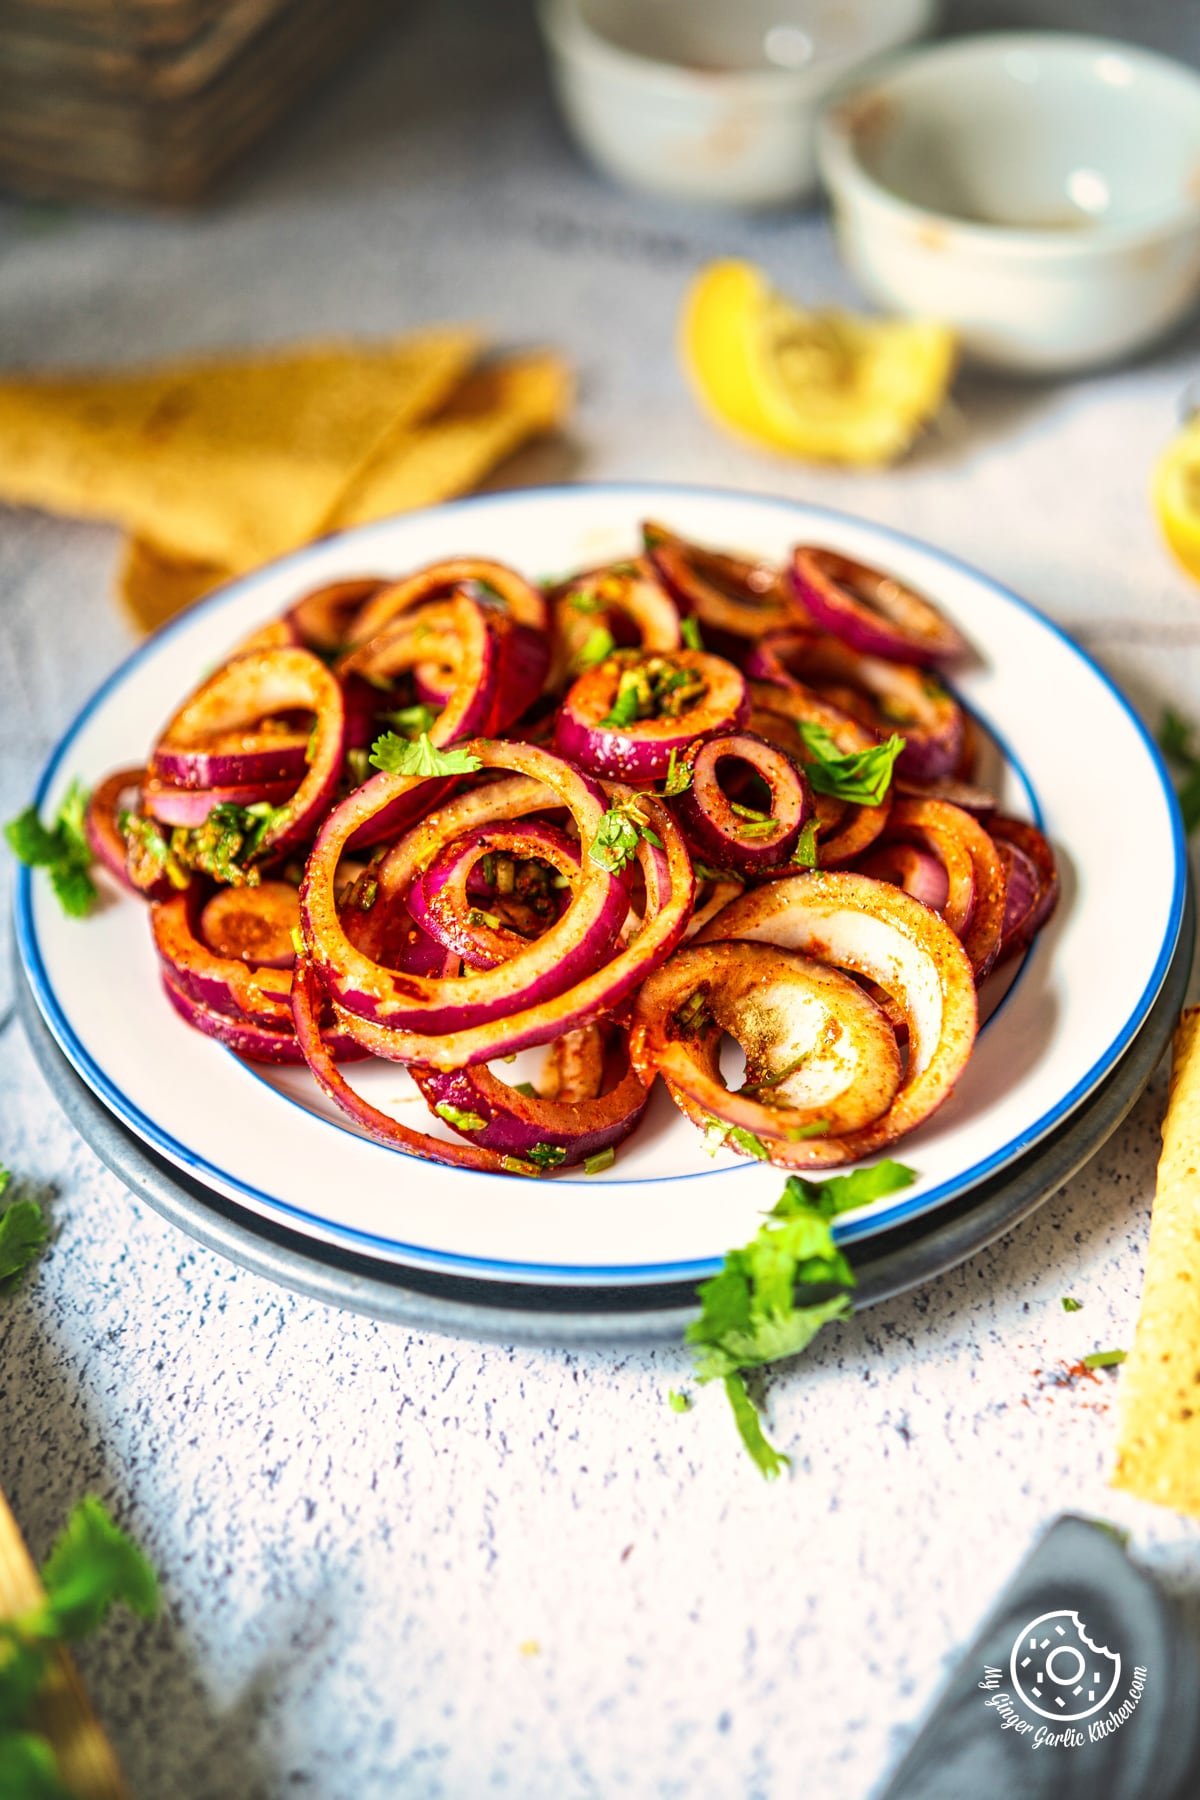 -photo of a plate of laccha onion with sliced lemons on a table